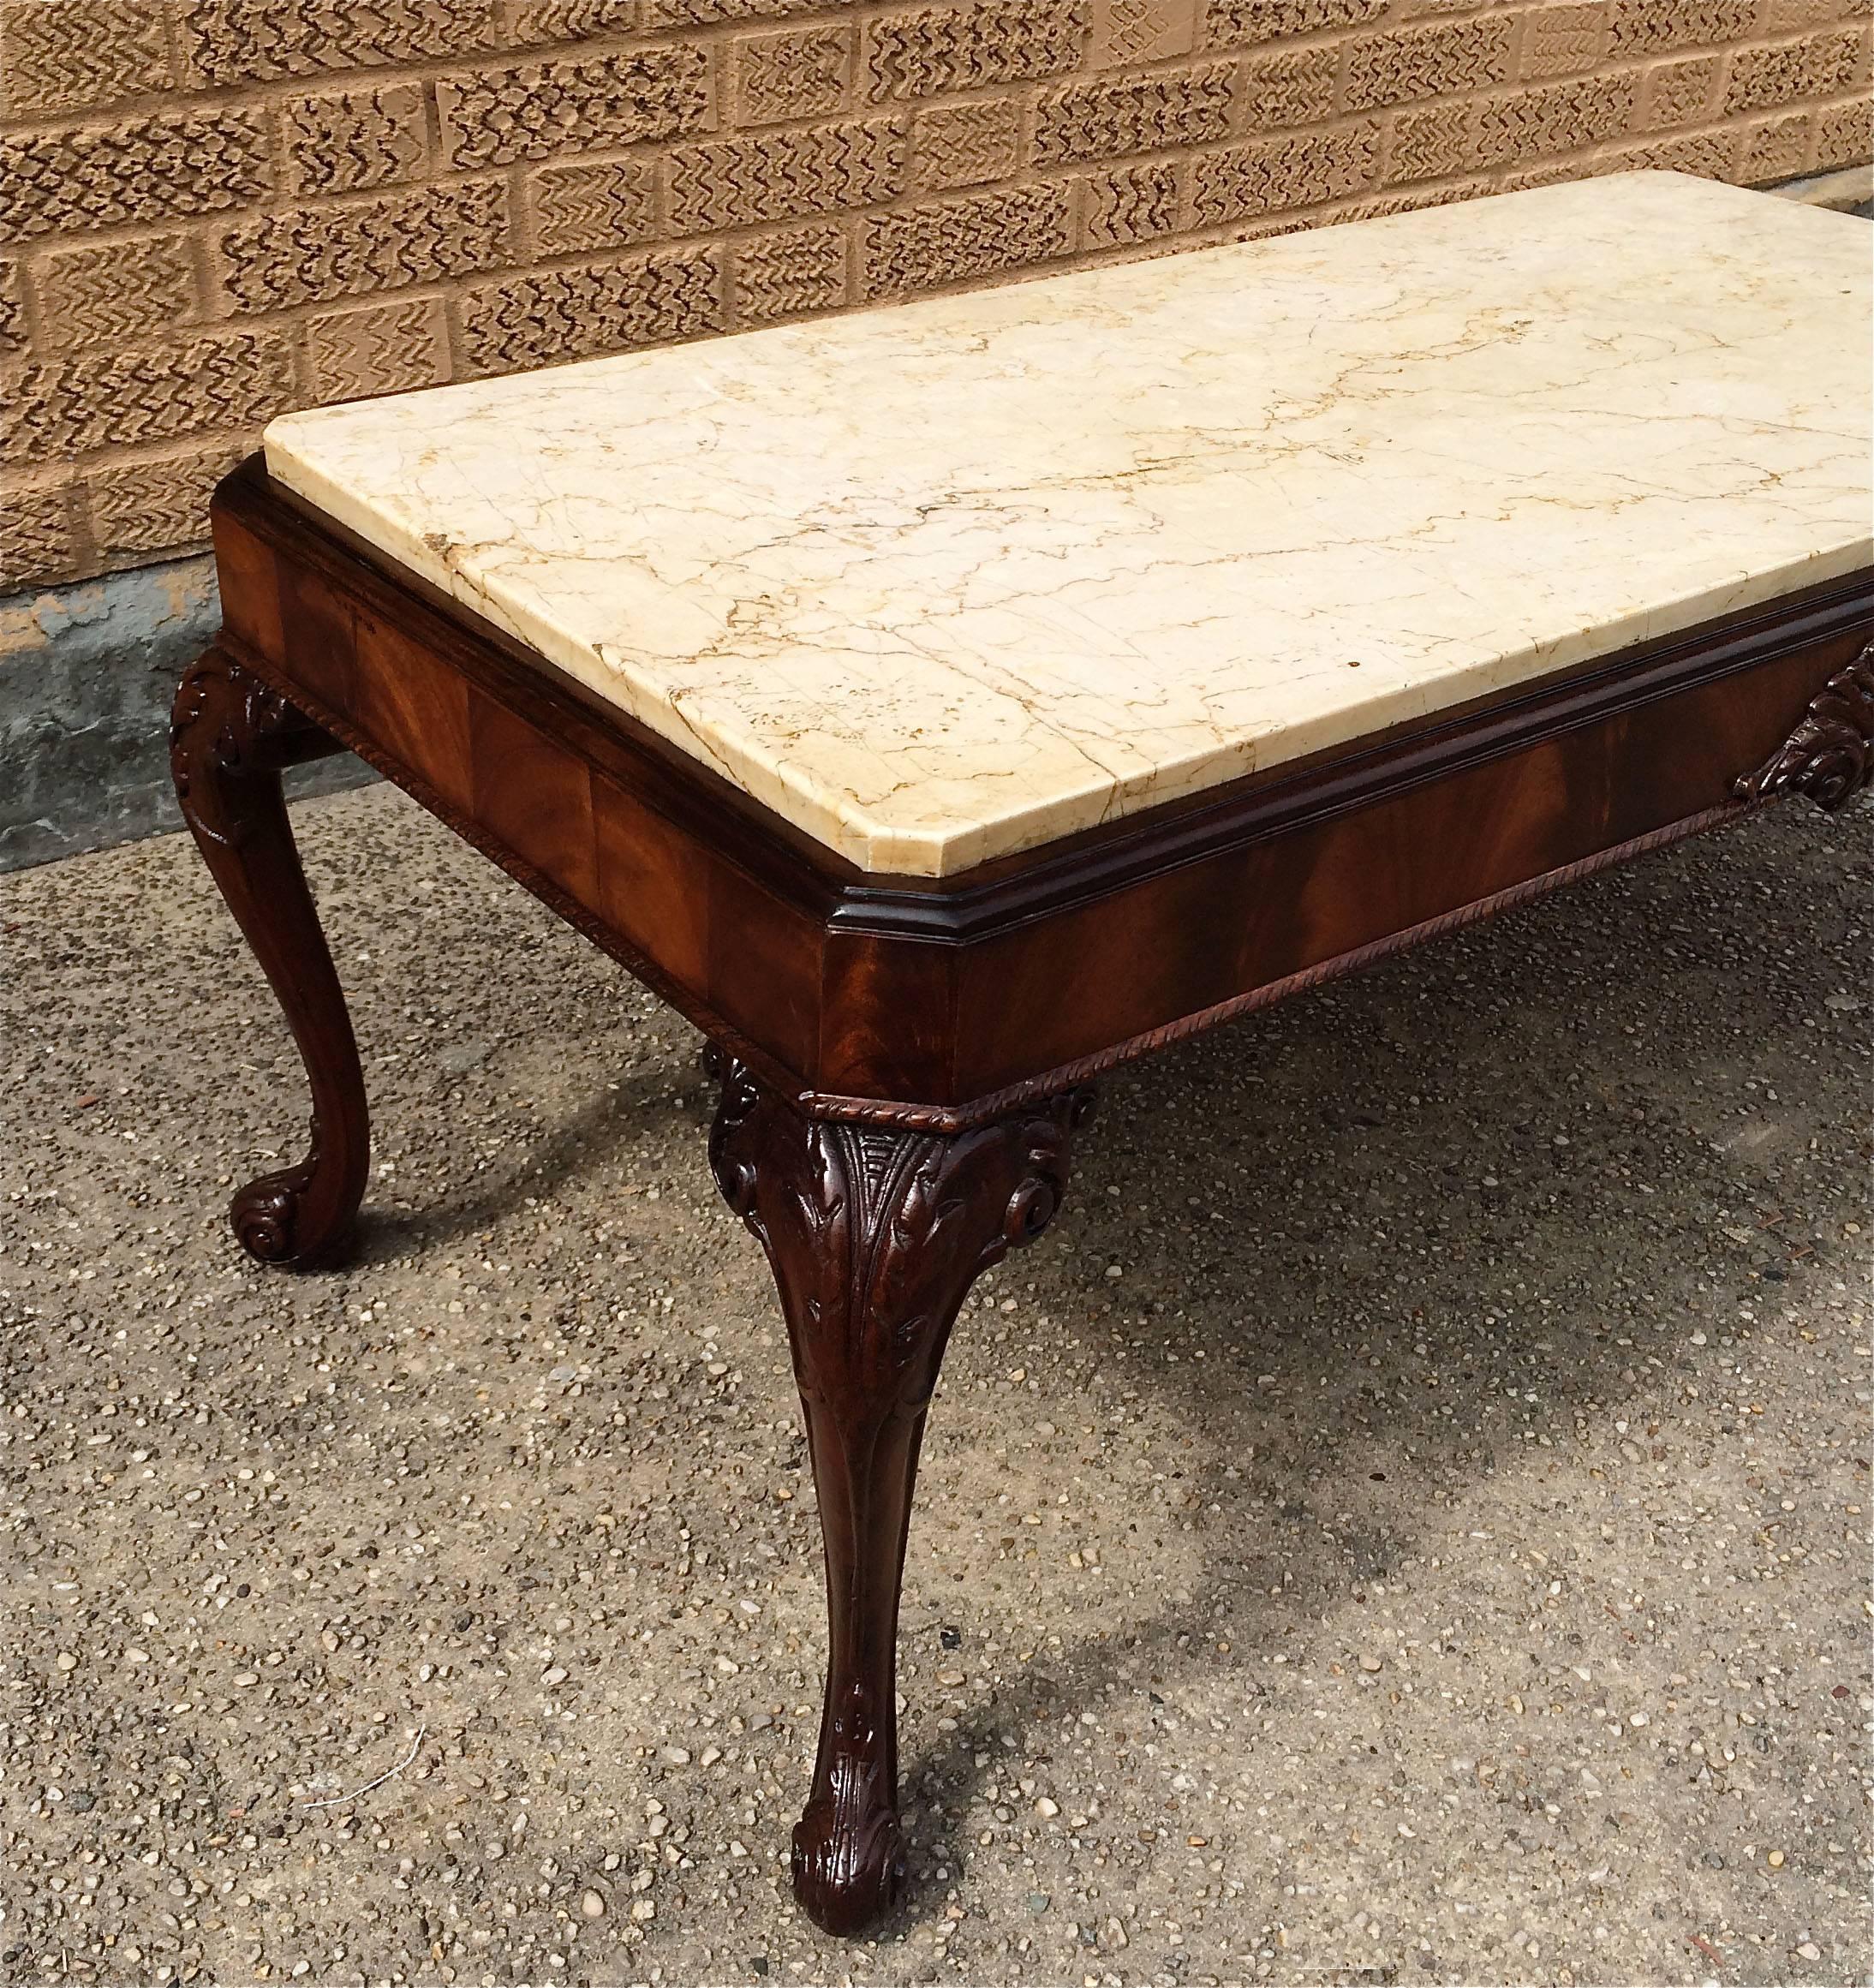 Victorian Antique Carved Flame Mahogany And Marble Coffee Table